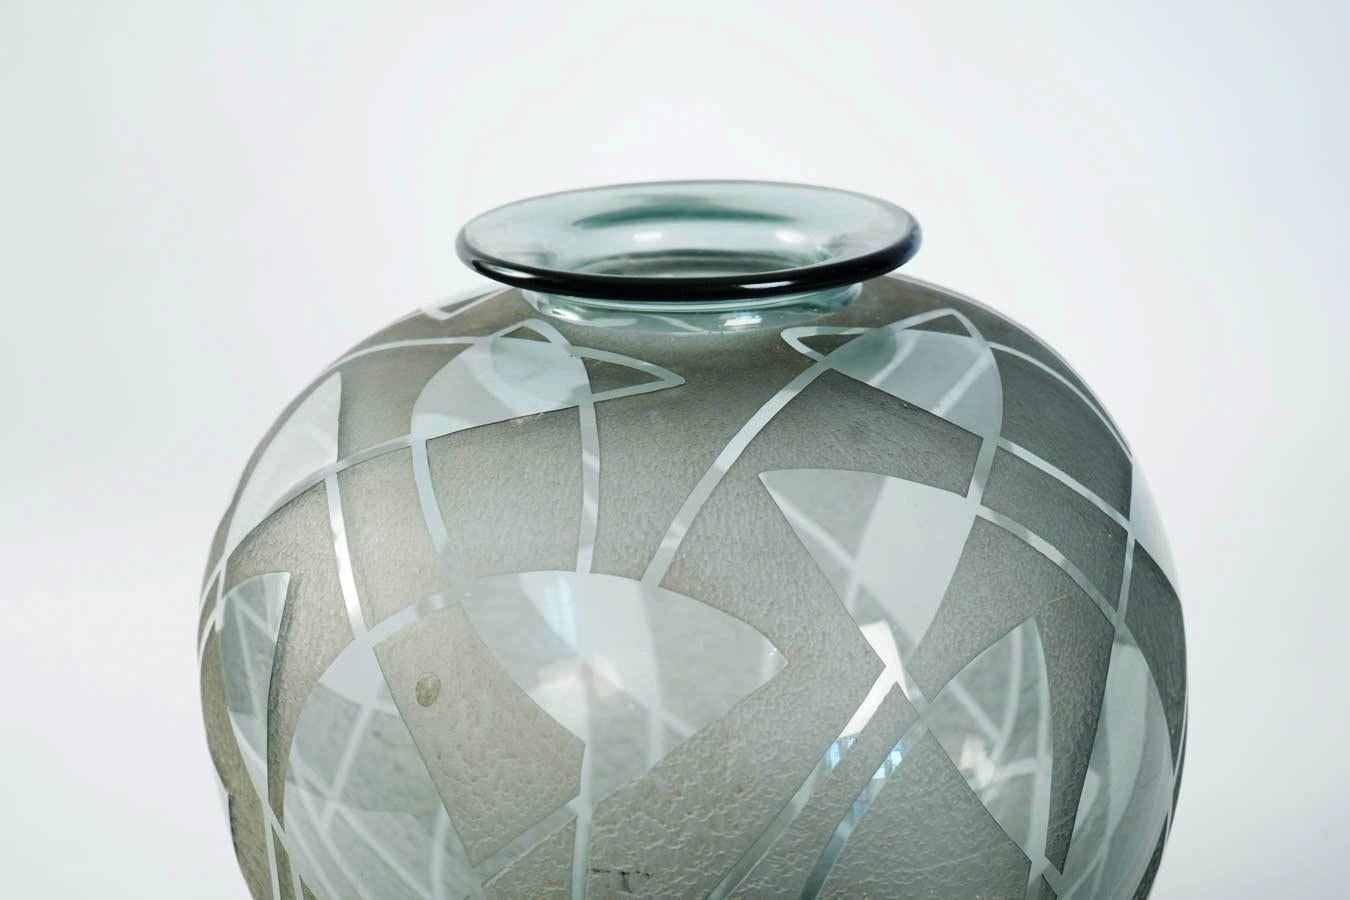 Rare and large 1930s Daum glass vase, round, France
Technique of 